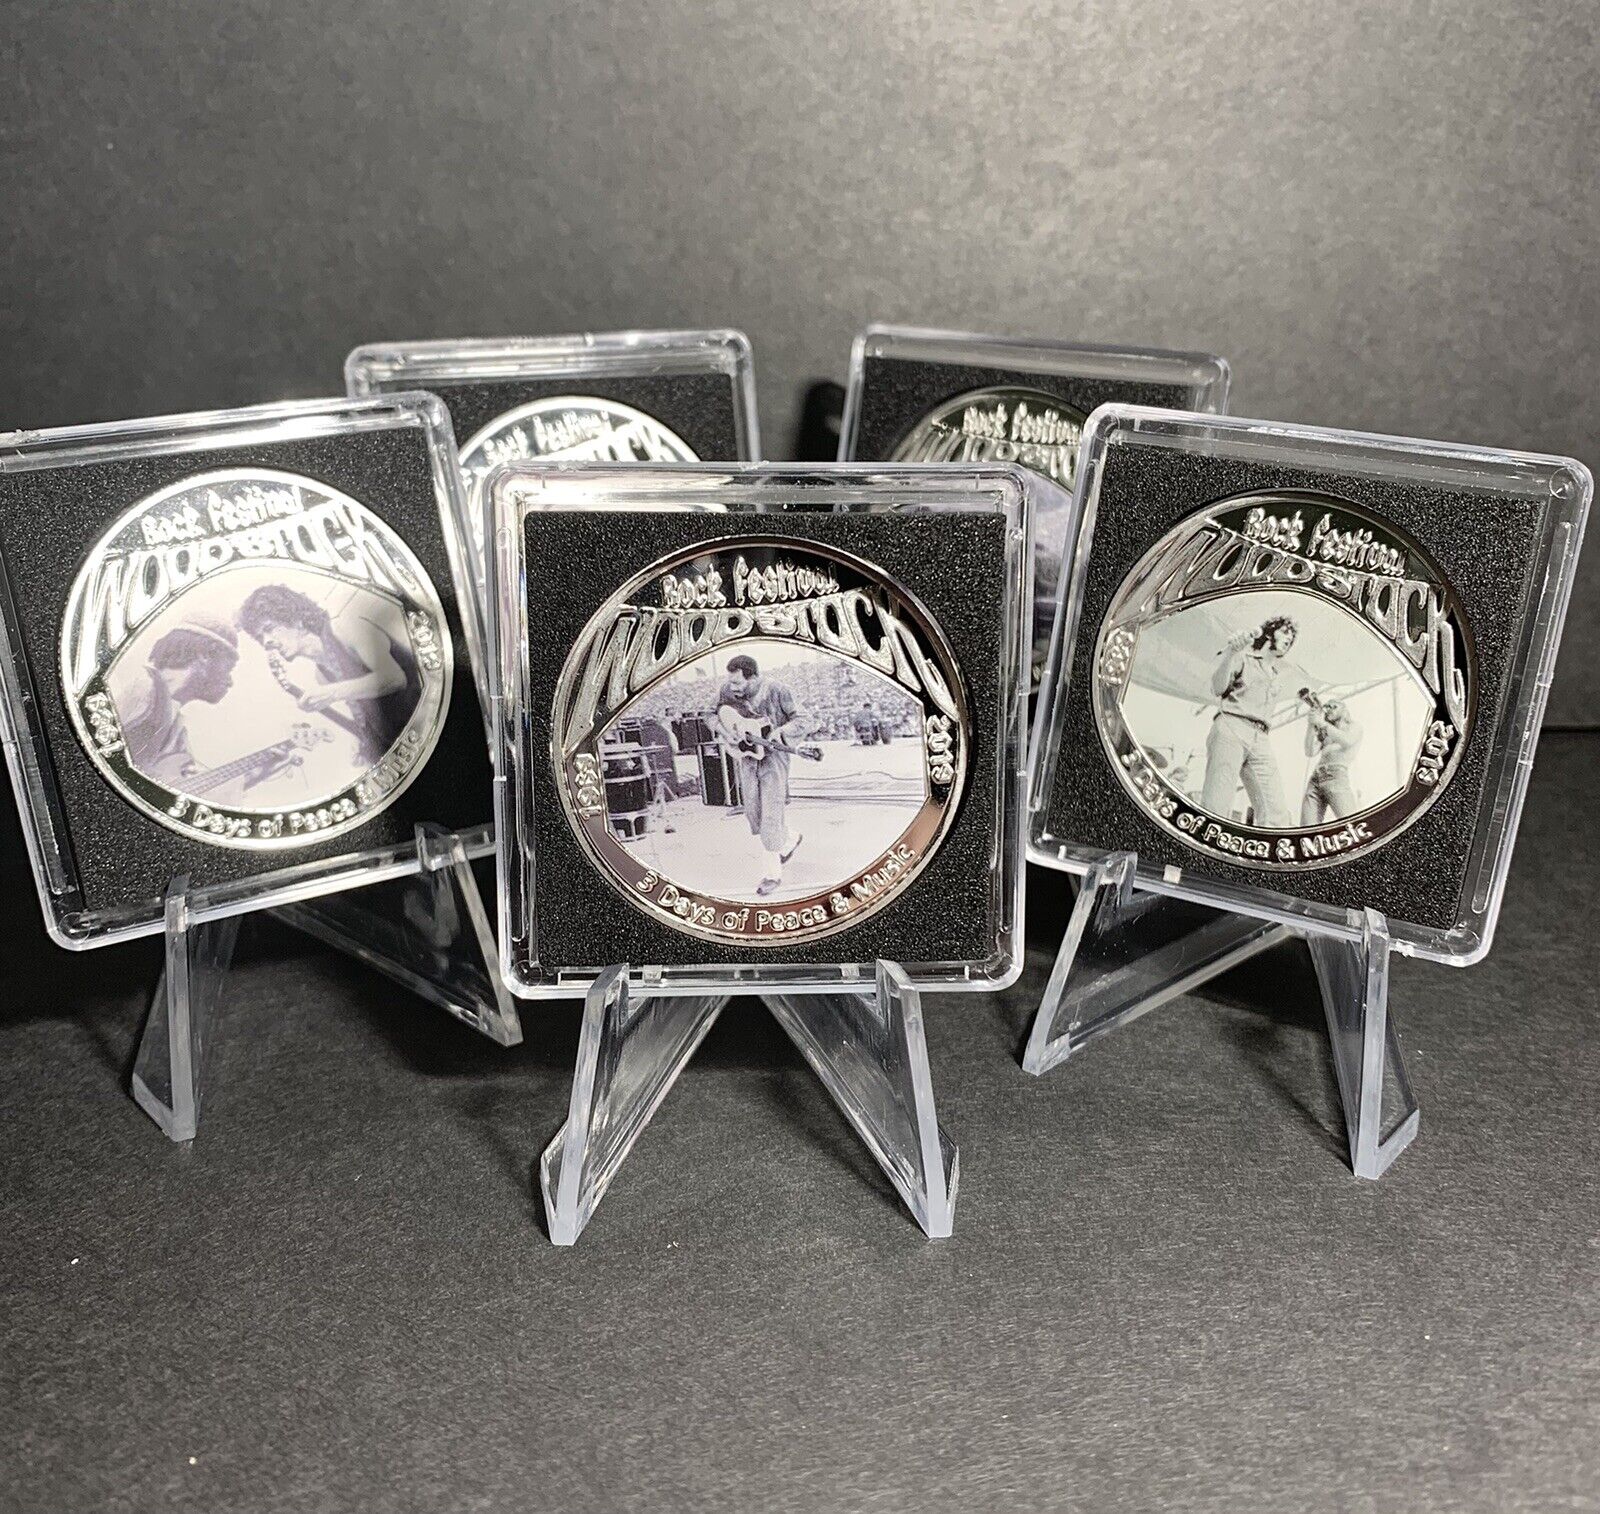 WOODSTOCK 1969 ROCK FEST 5 PC Challenge Coin Set w Cases & Stands-Great Deal! Без бренда